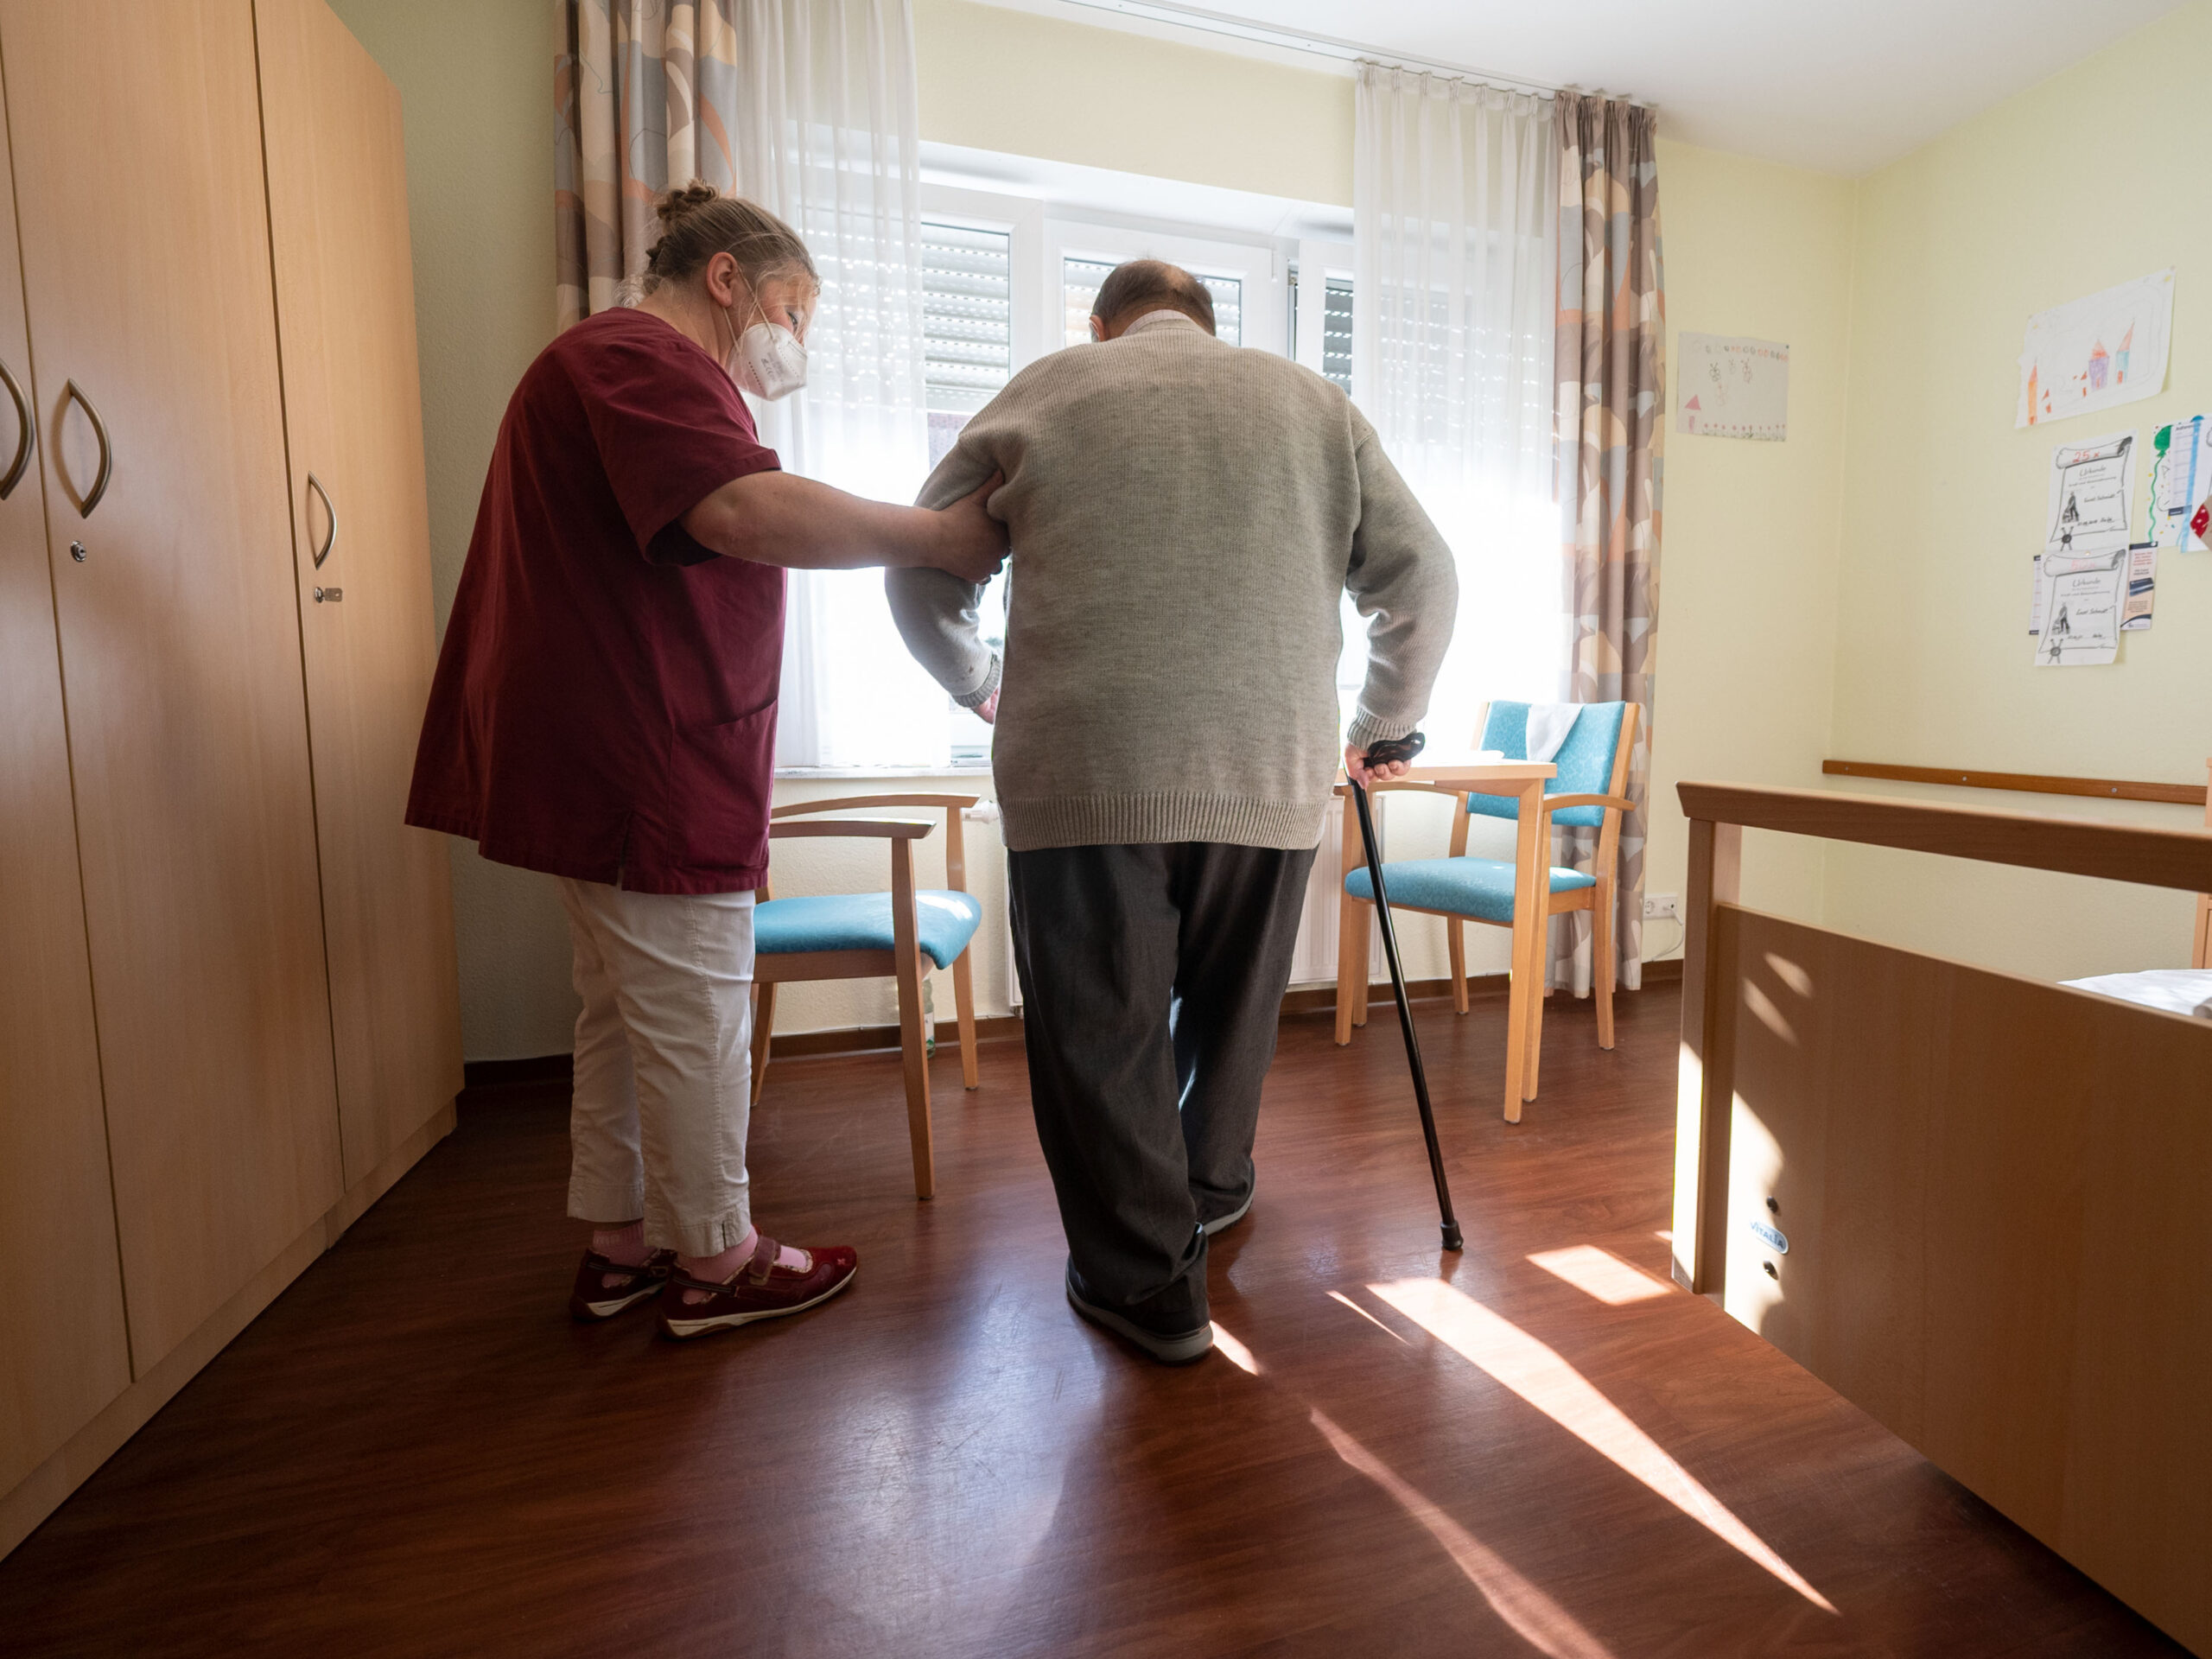 Most nursing homes don’t have enough staff to meet the federal government’s new rules